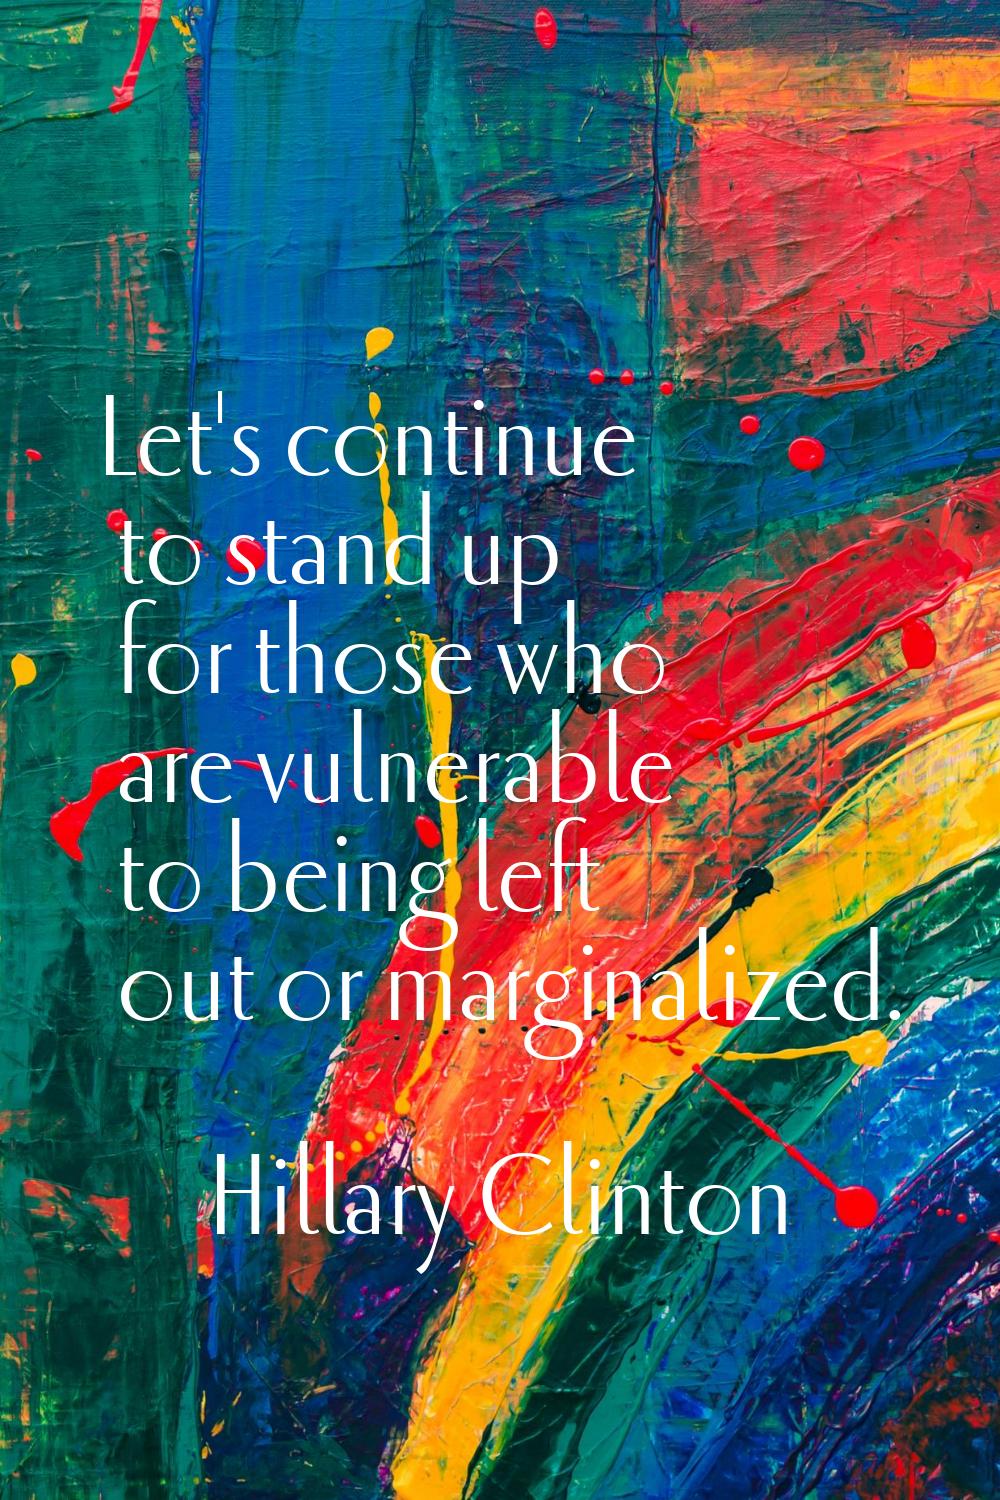 Let's continue to stand up for those who are vulnerable to being left out or marginalized.